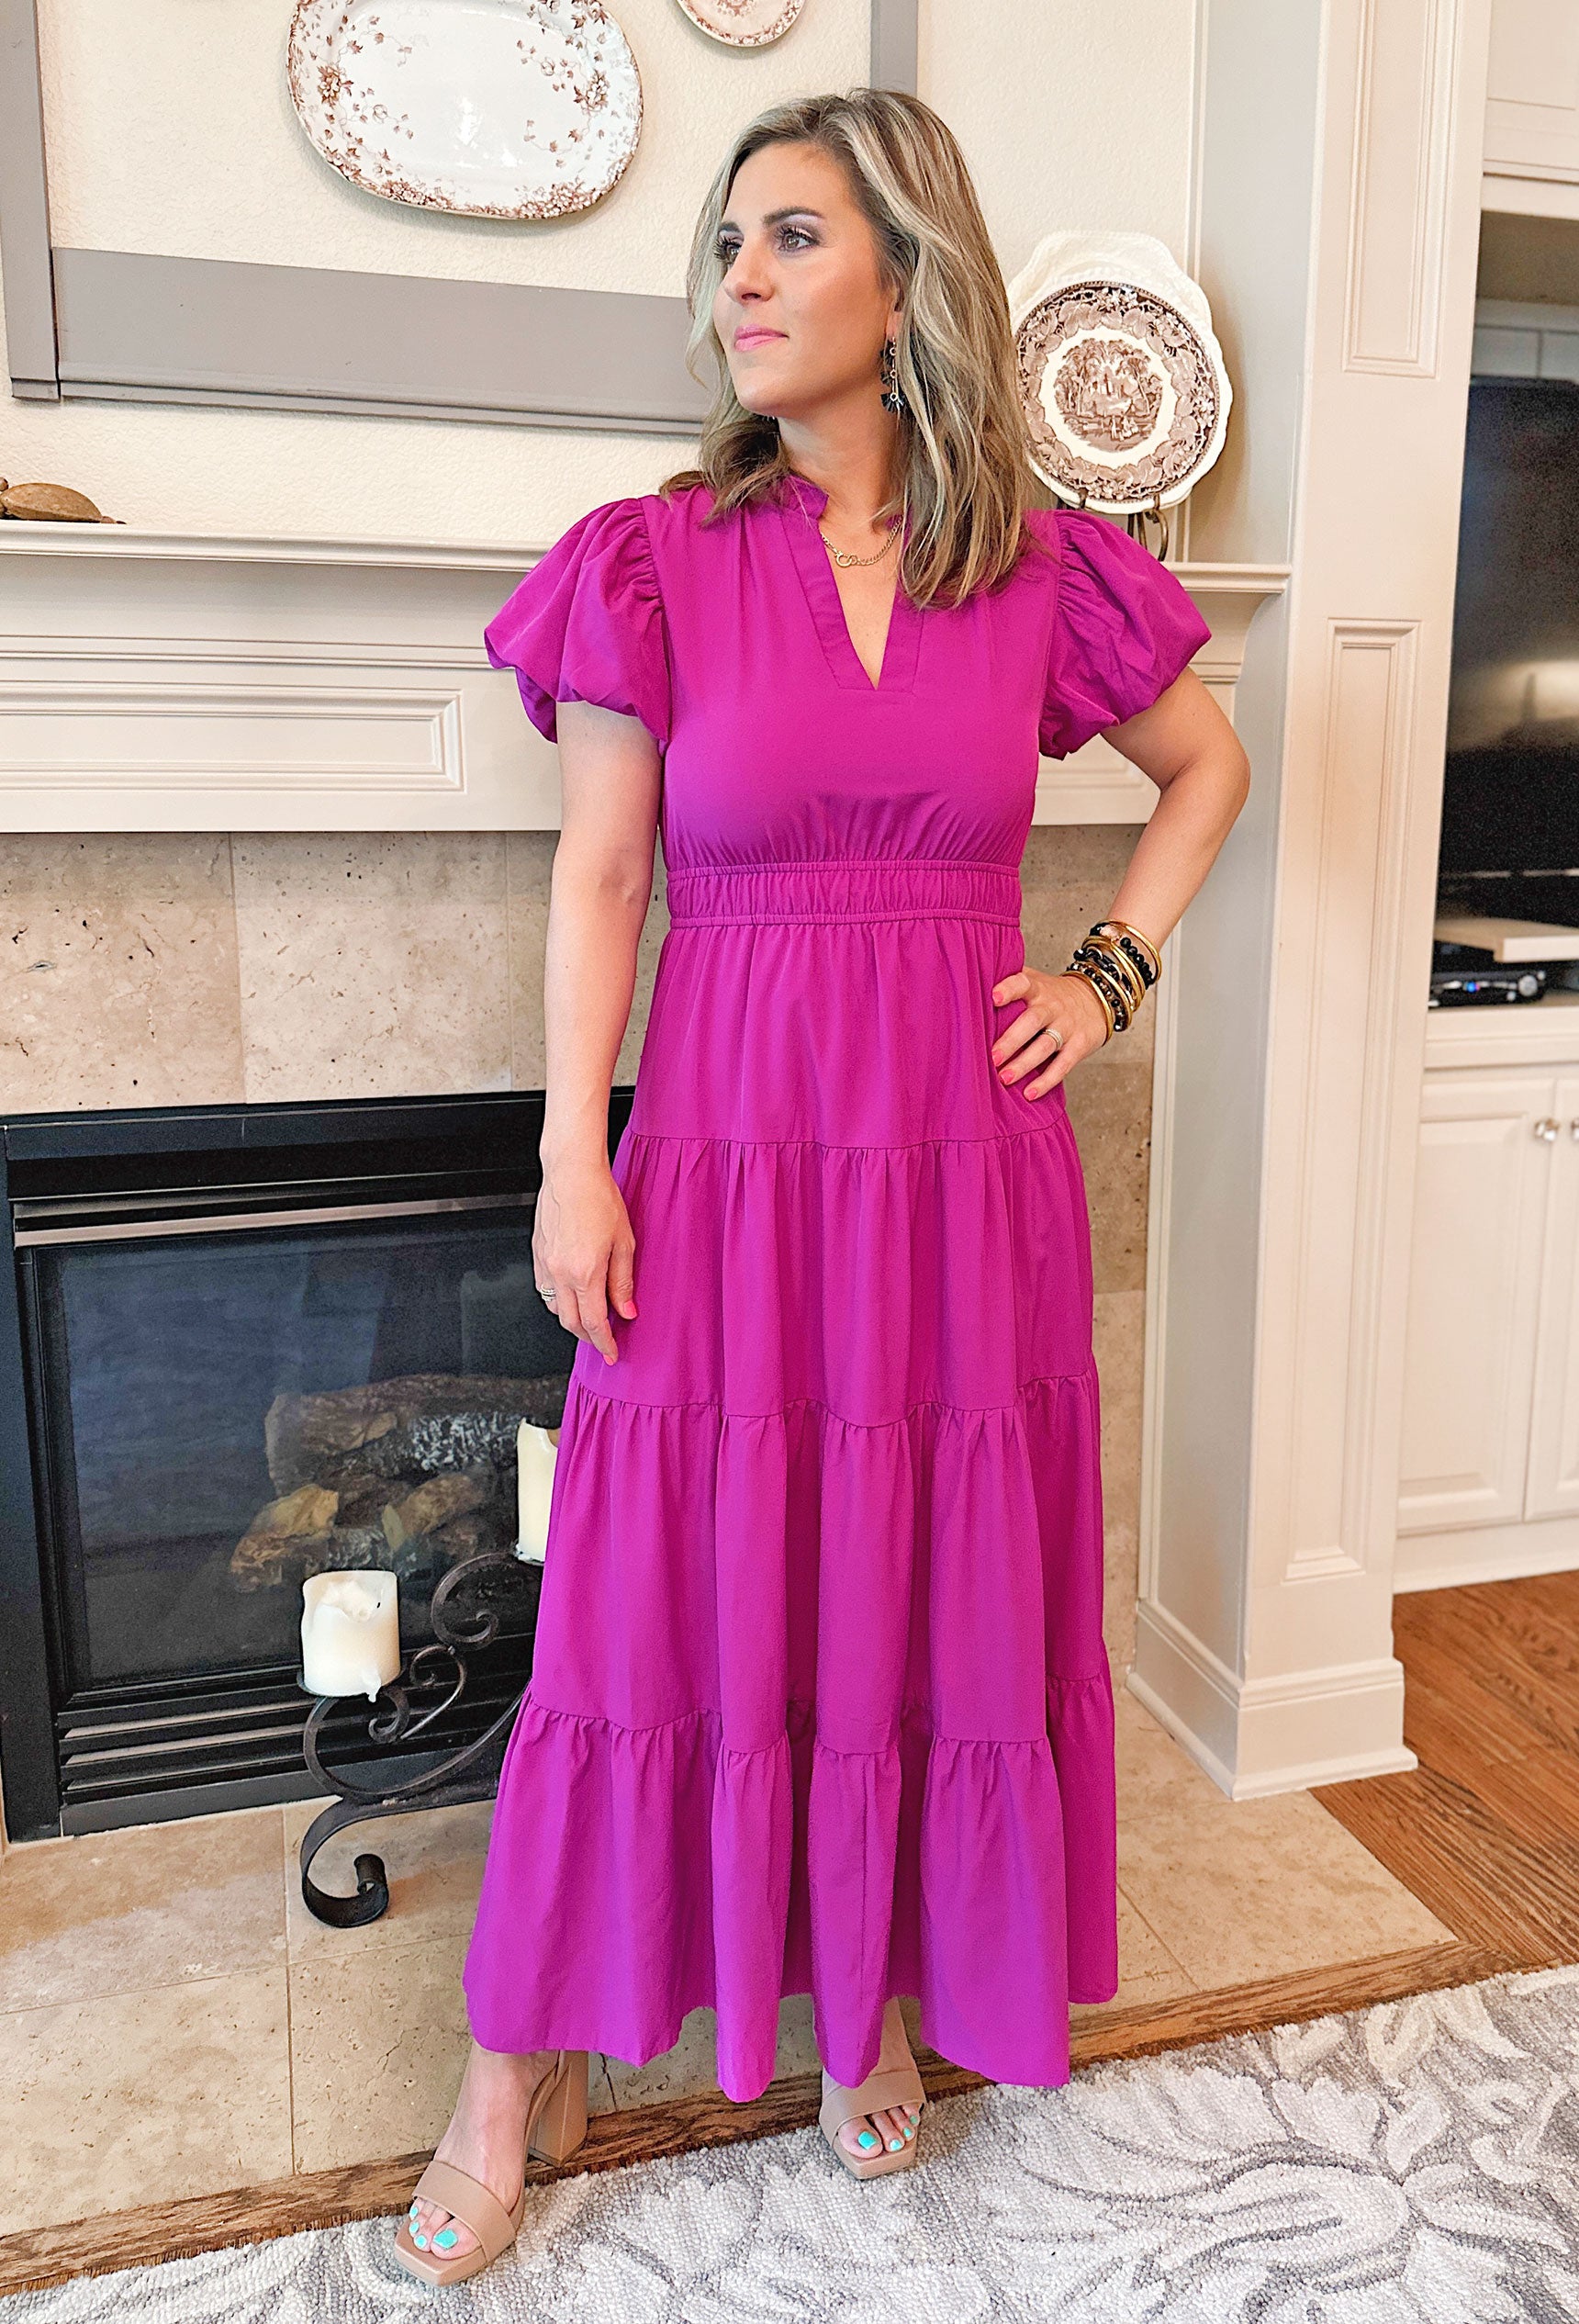 Take It To Heart Midi Dress in Violet, V-Neck puff sleeve tiered dress with cinching at the waist line